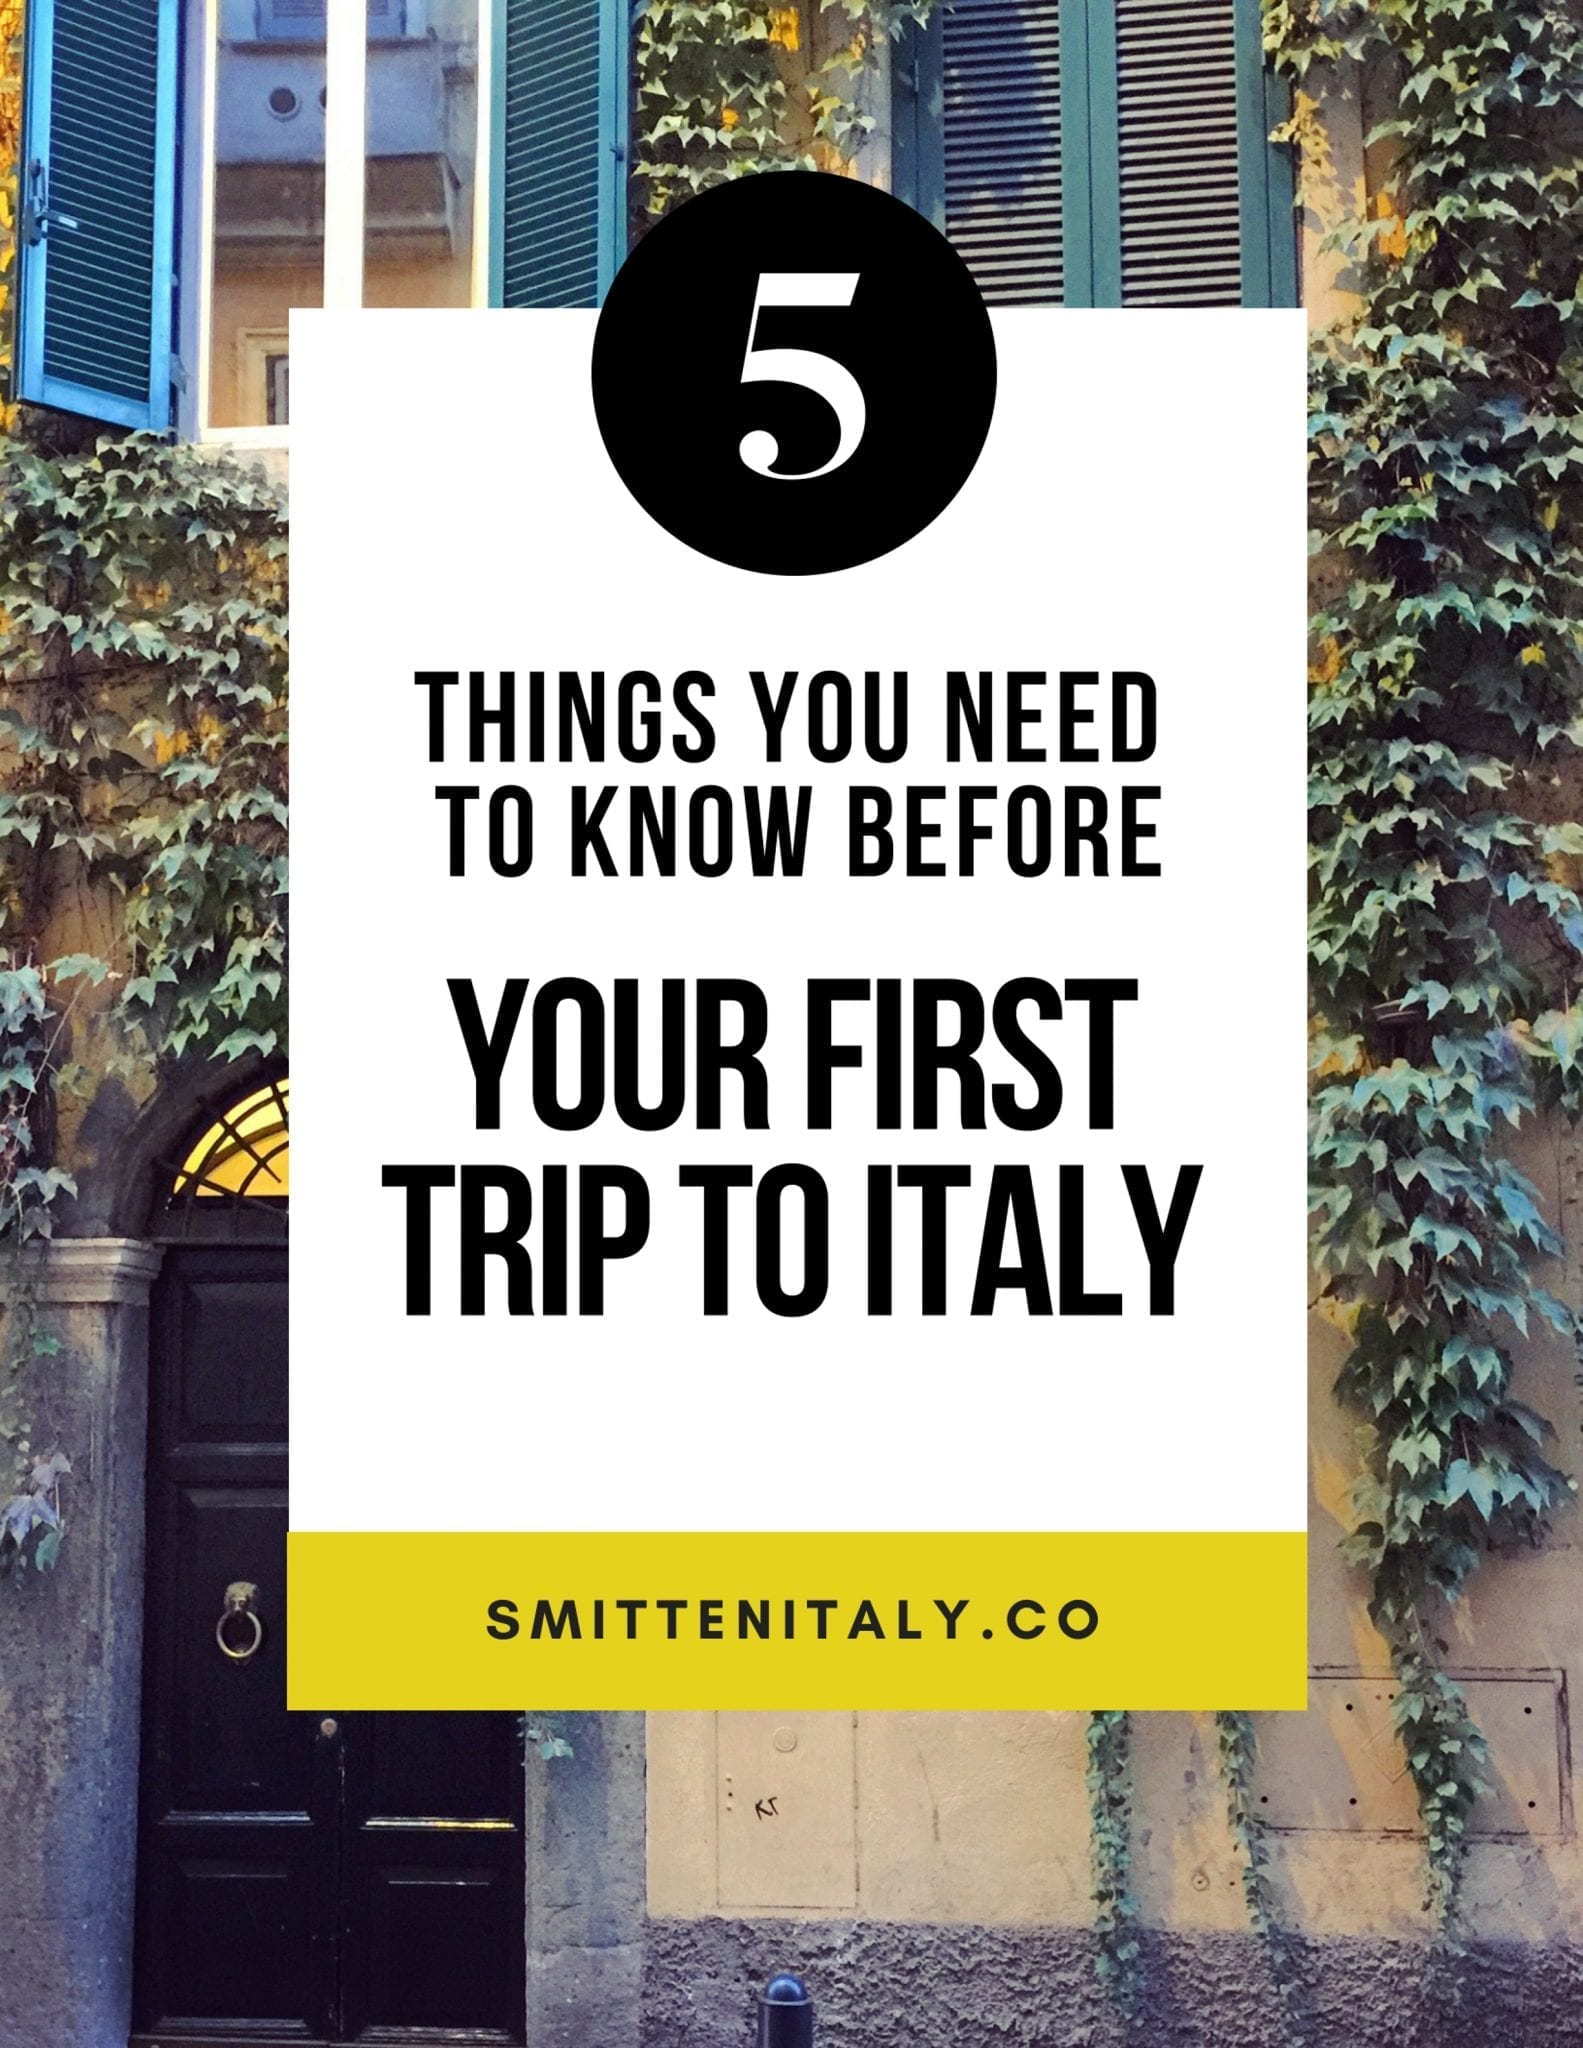 5 Tips for your First Trip to Italy